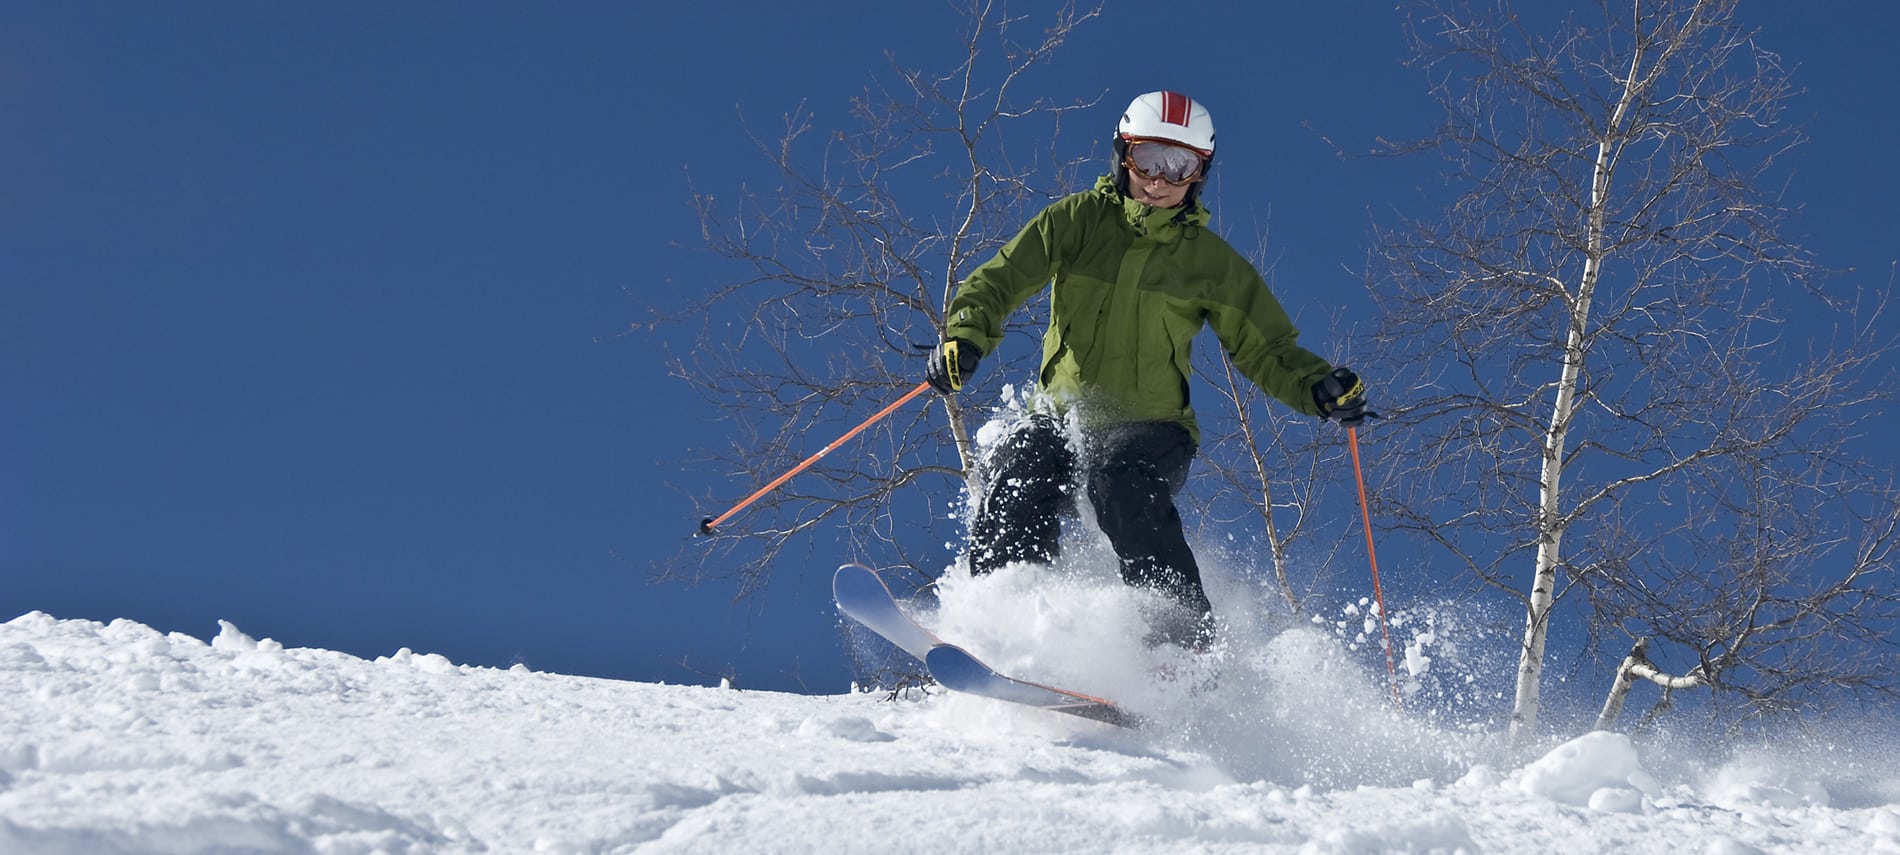 Person snow skiing down hill amidst crisp blue skies